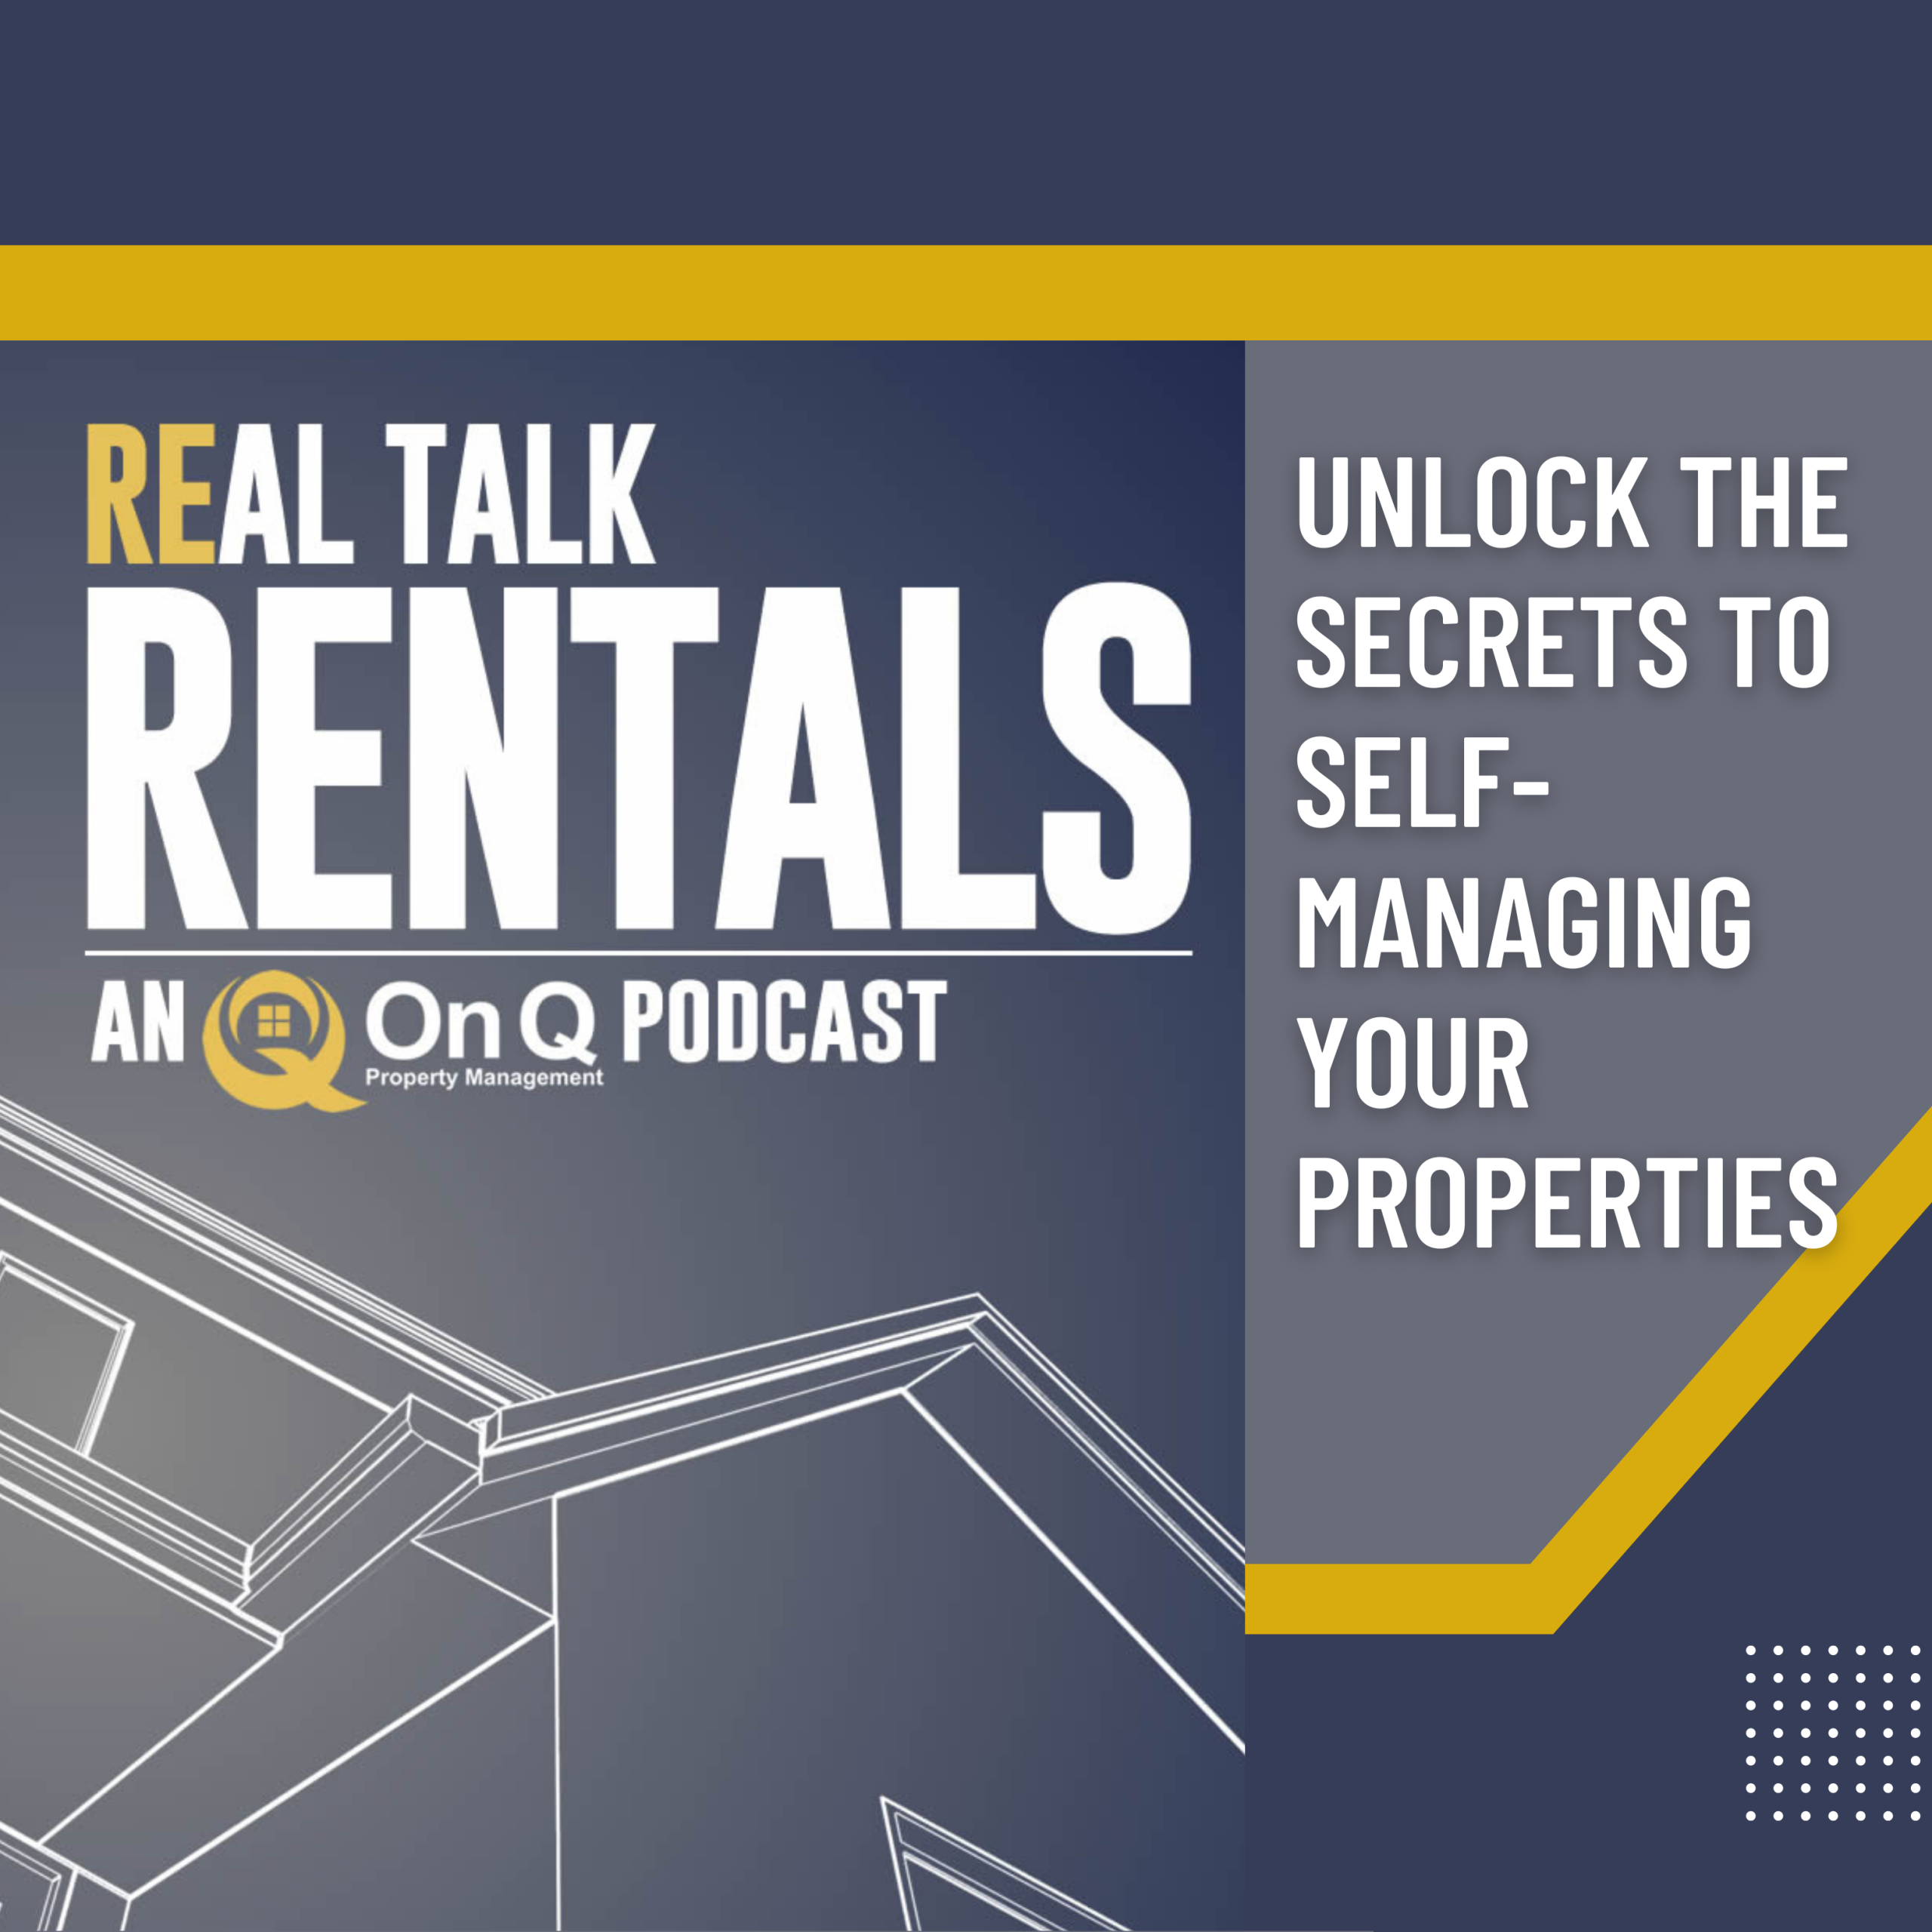 Unlock the Secrets to Self-Managing Your Properties SQ